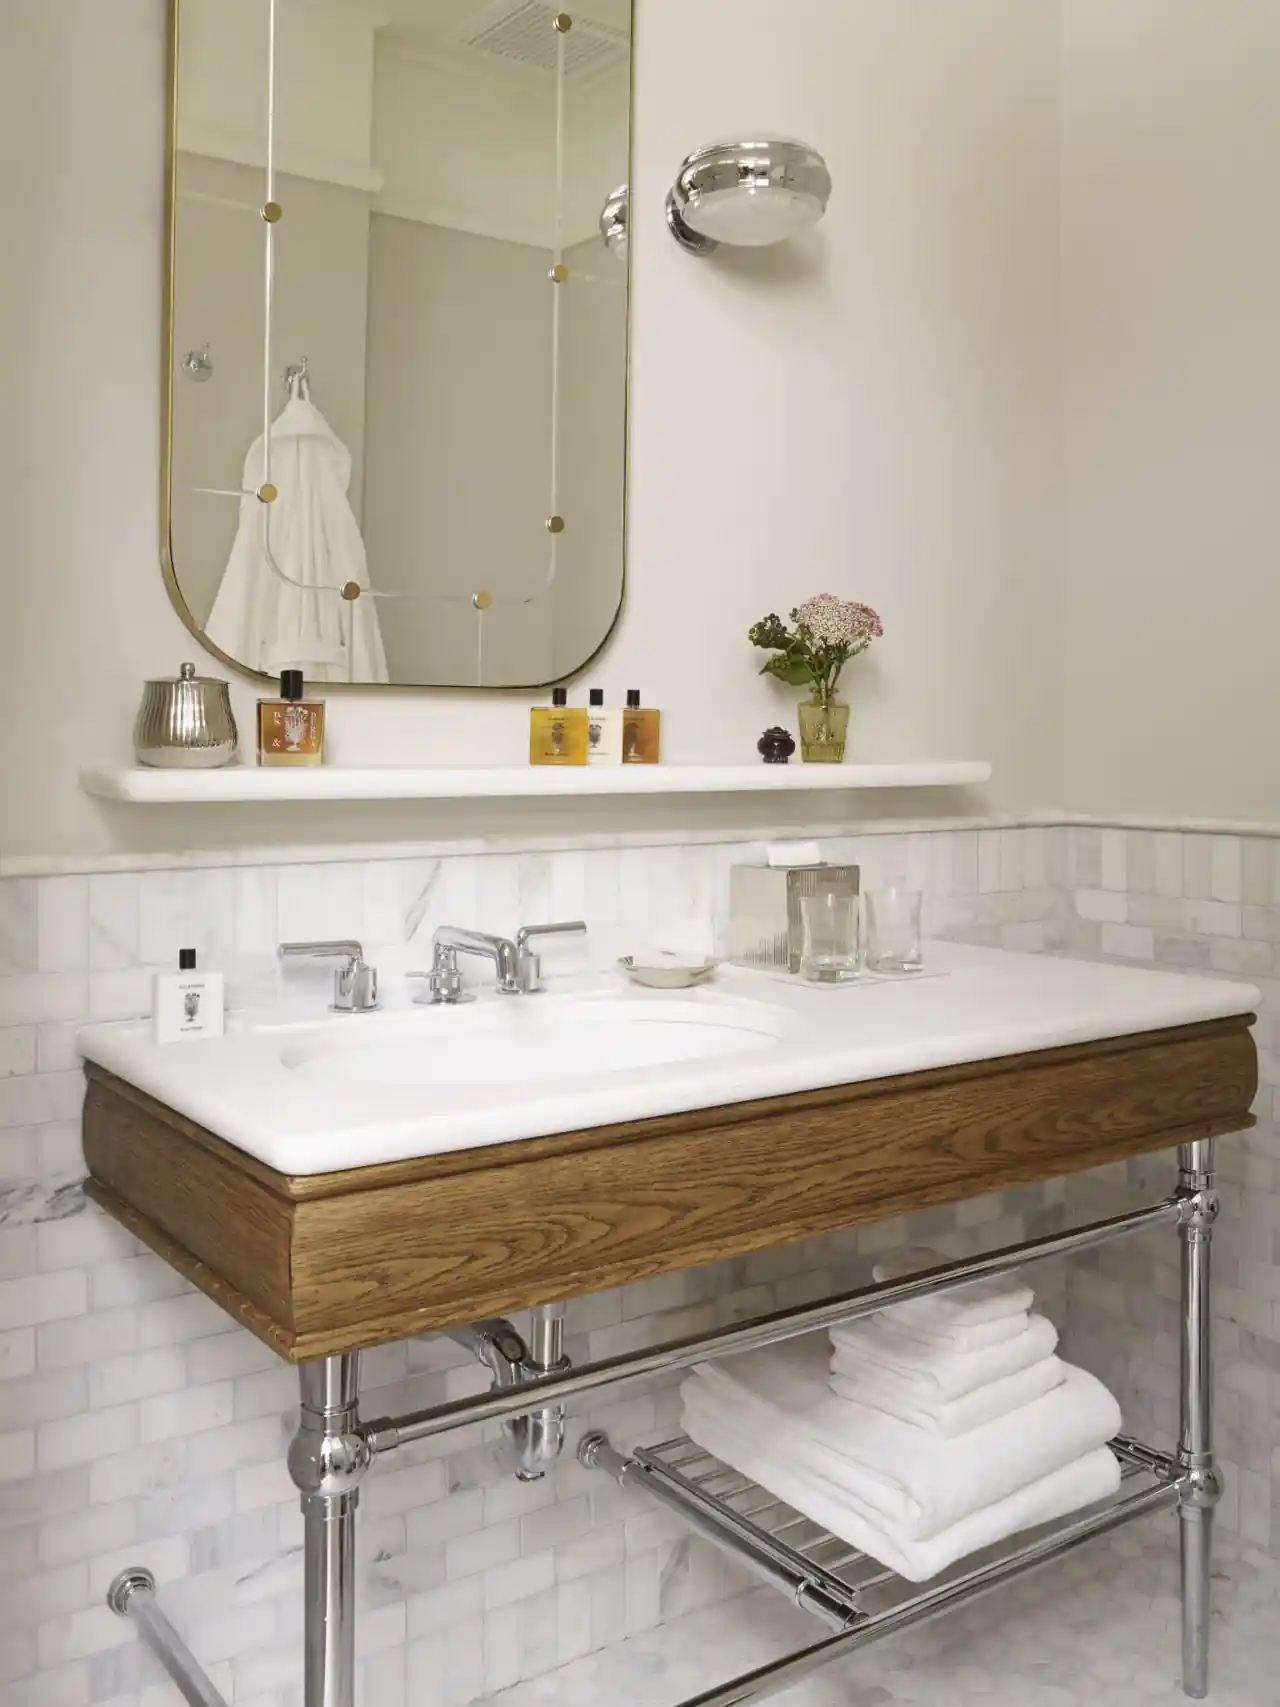 Large size mirror hanging just above the wash basin and some towels are kept just below the wash basin